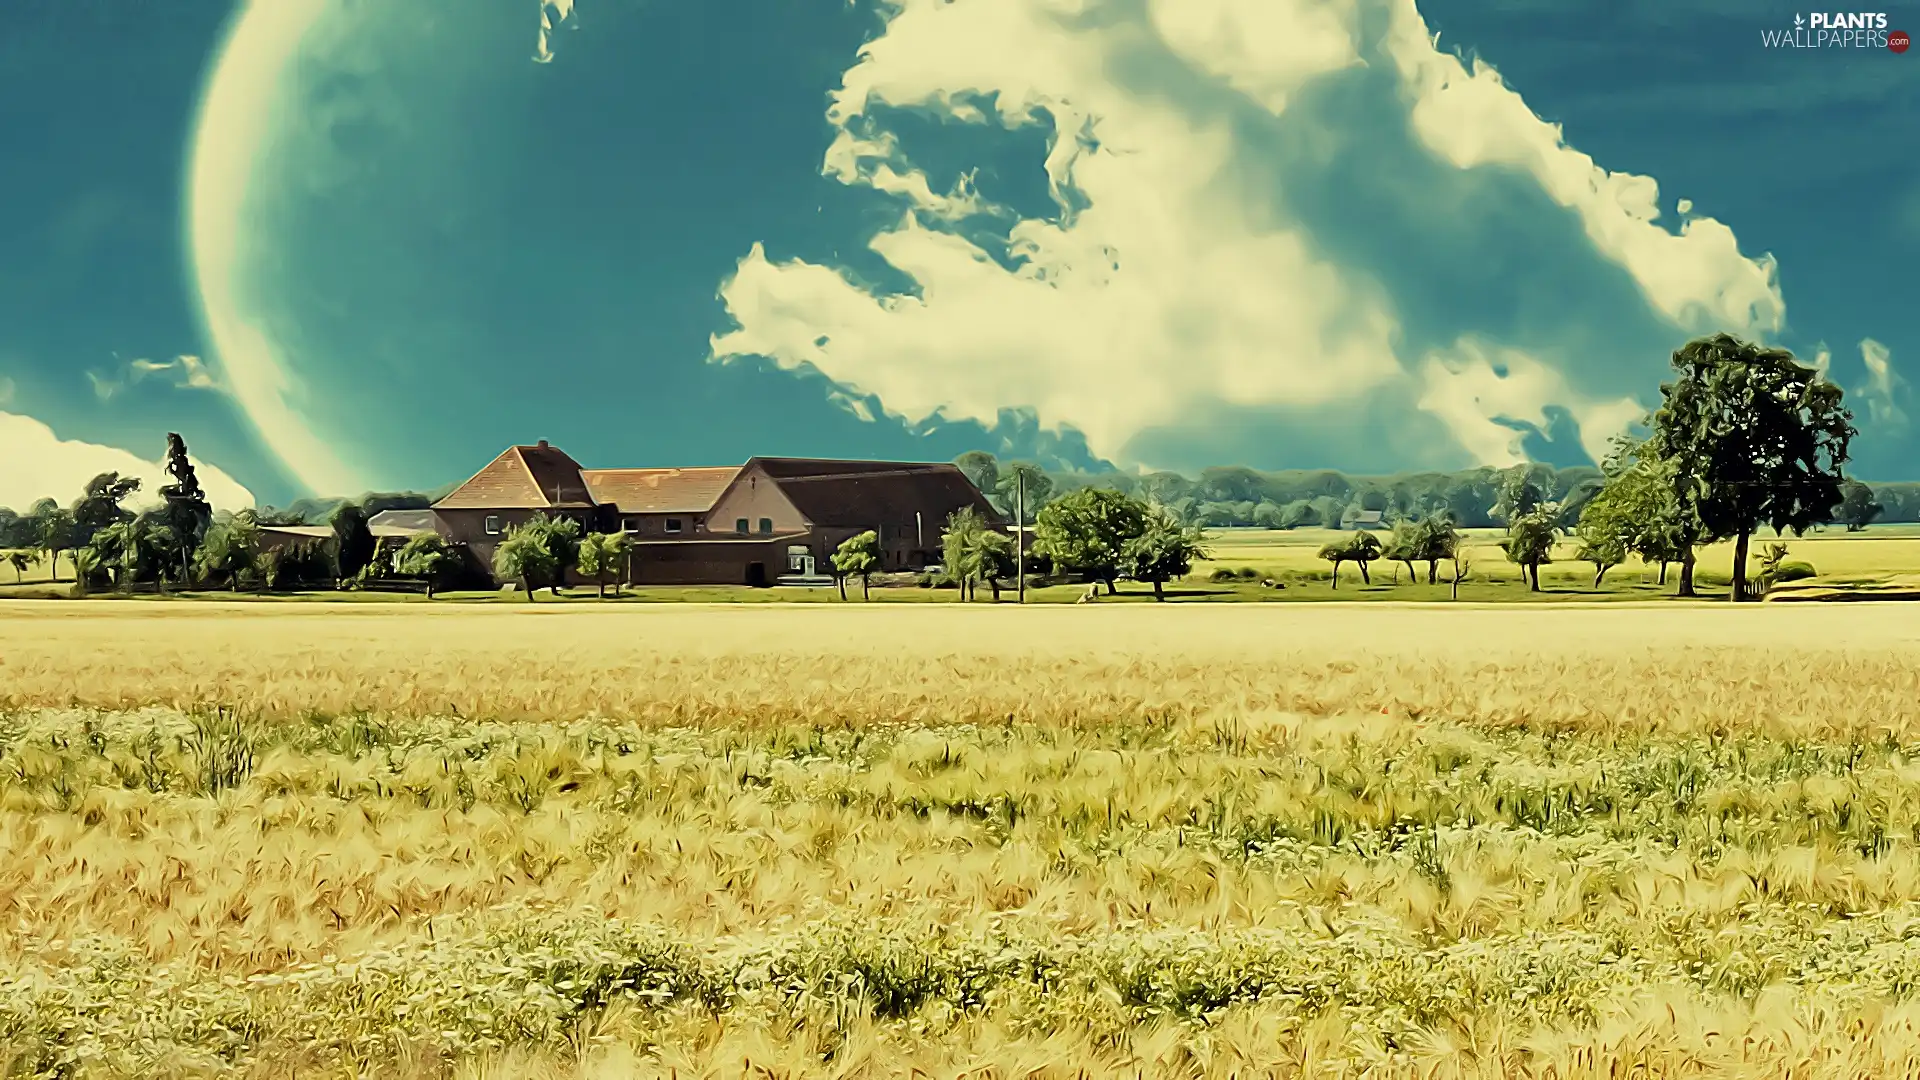 viewes, house, field, clouds, farm, trees